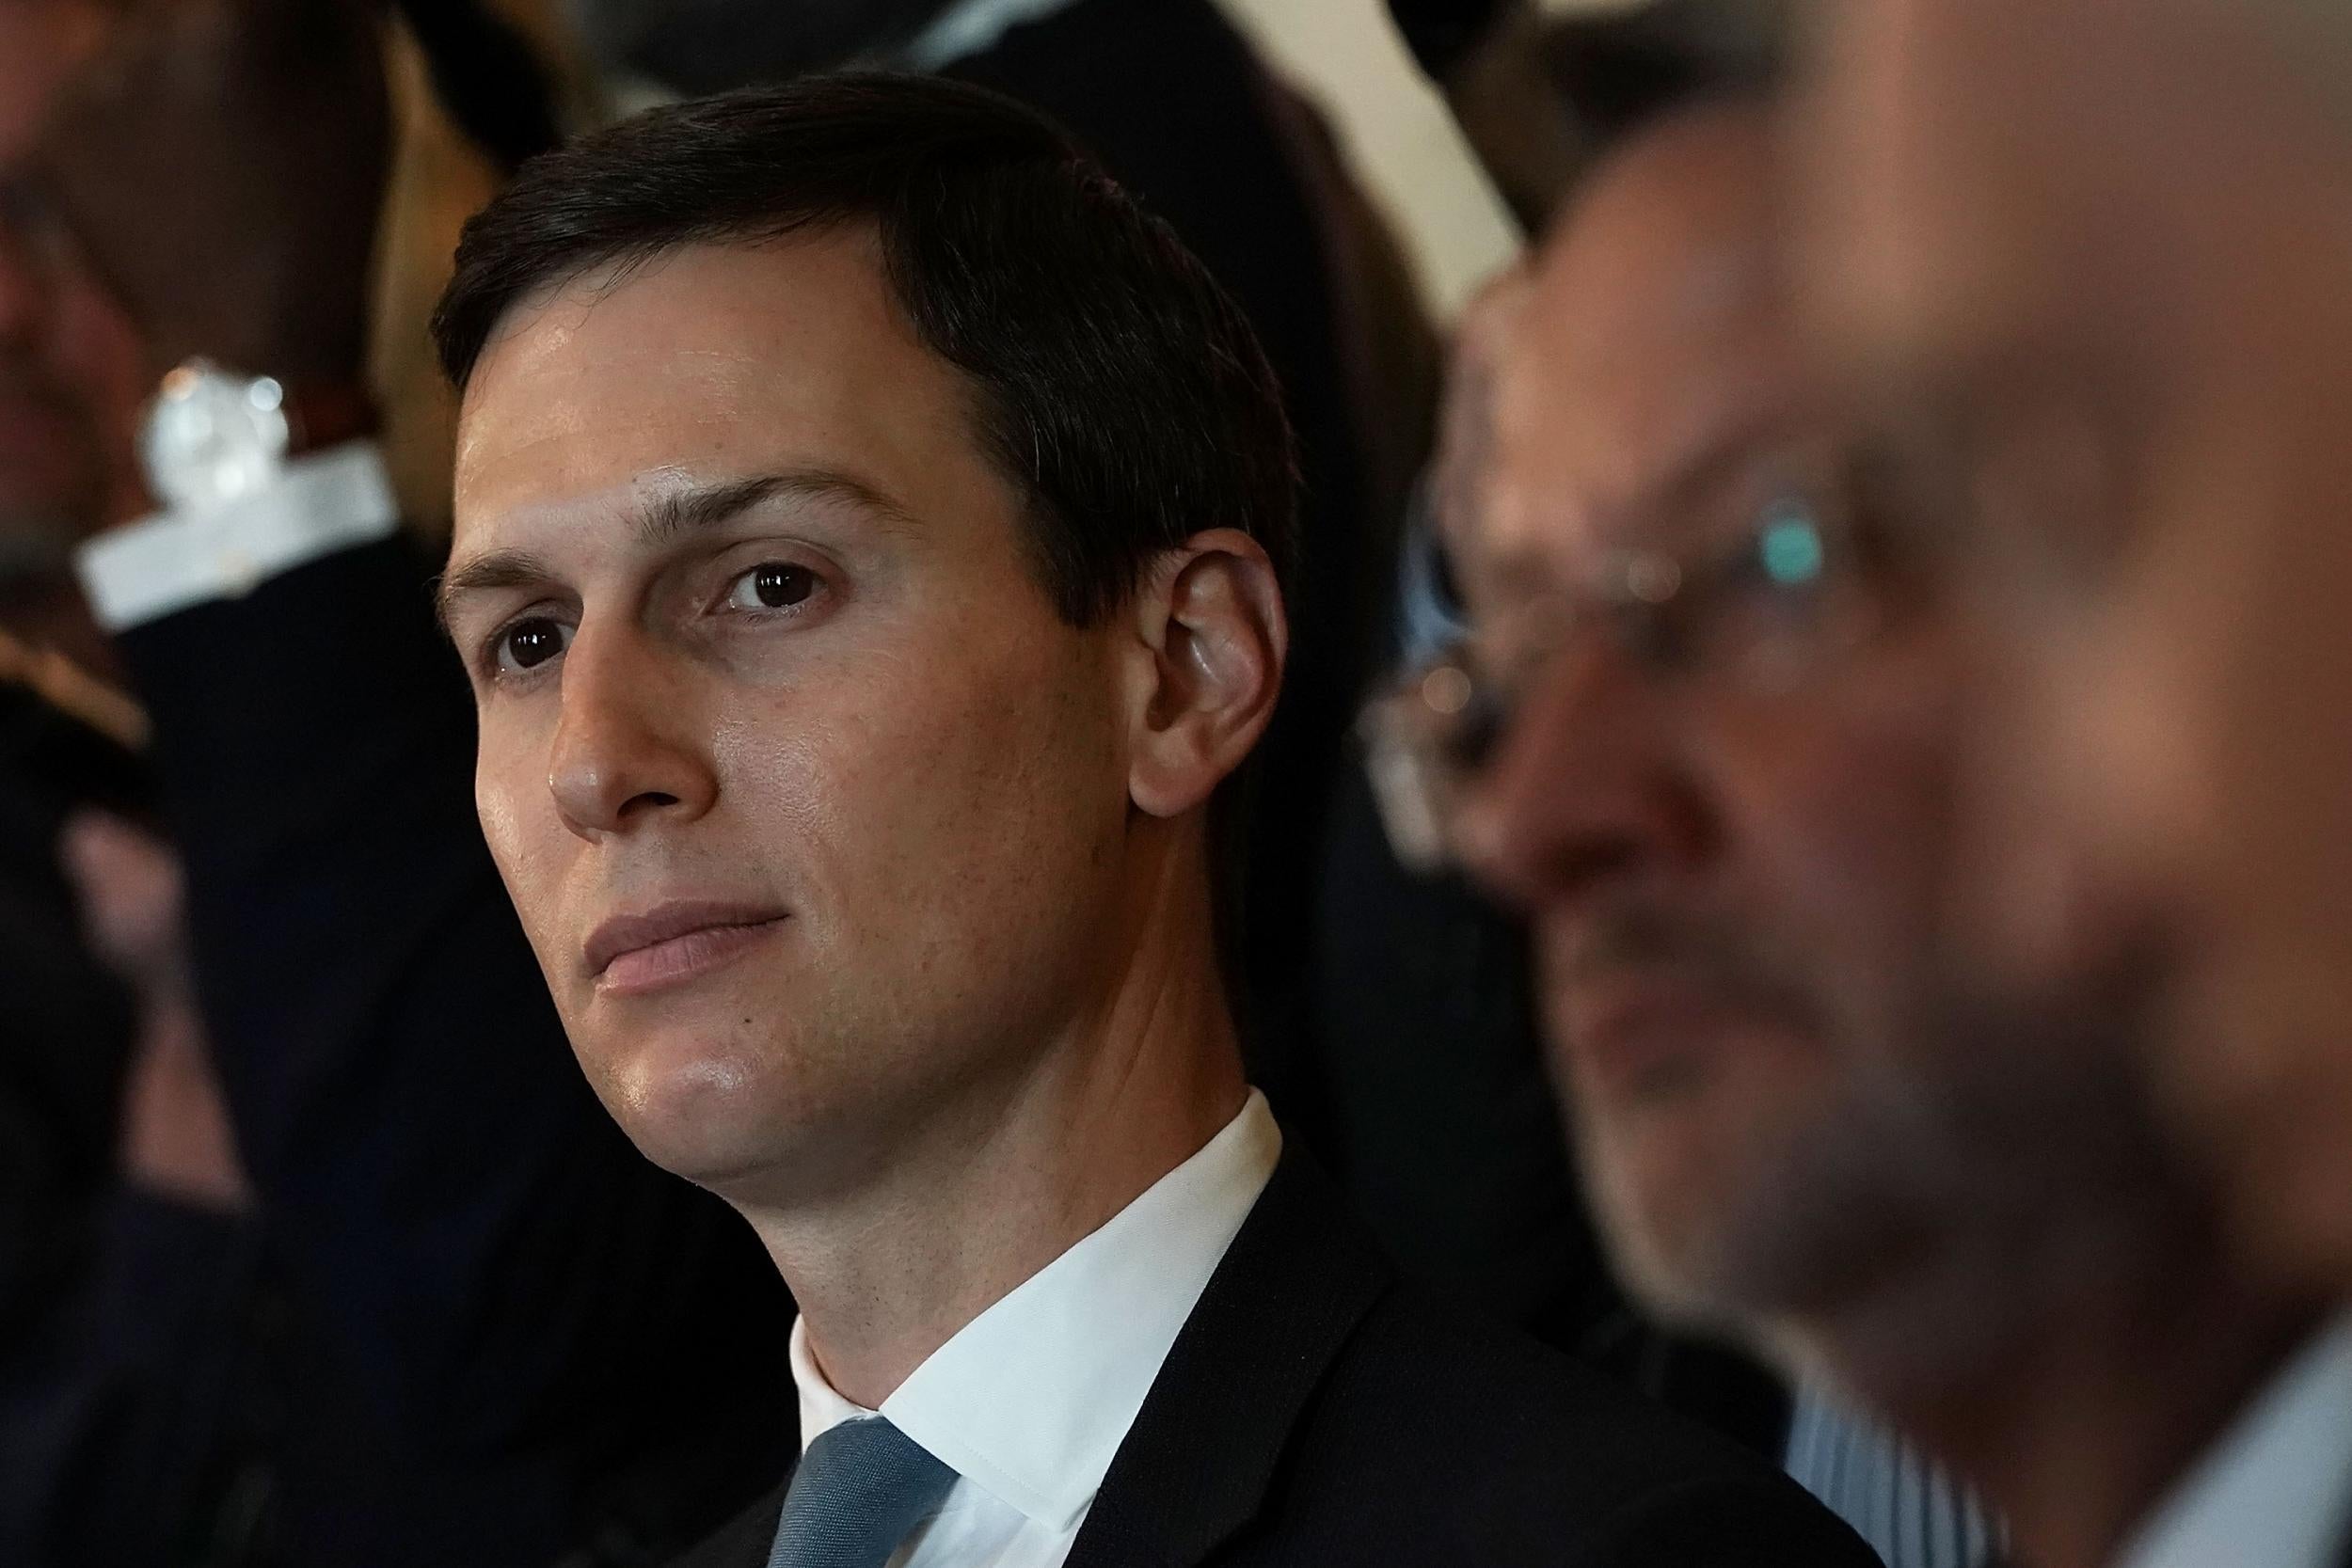 Jared Kushner listens during a meeting between President Donald Trump and congressional members